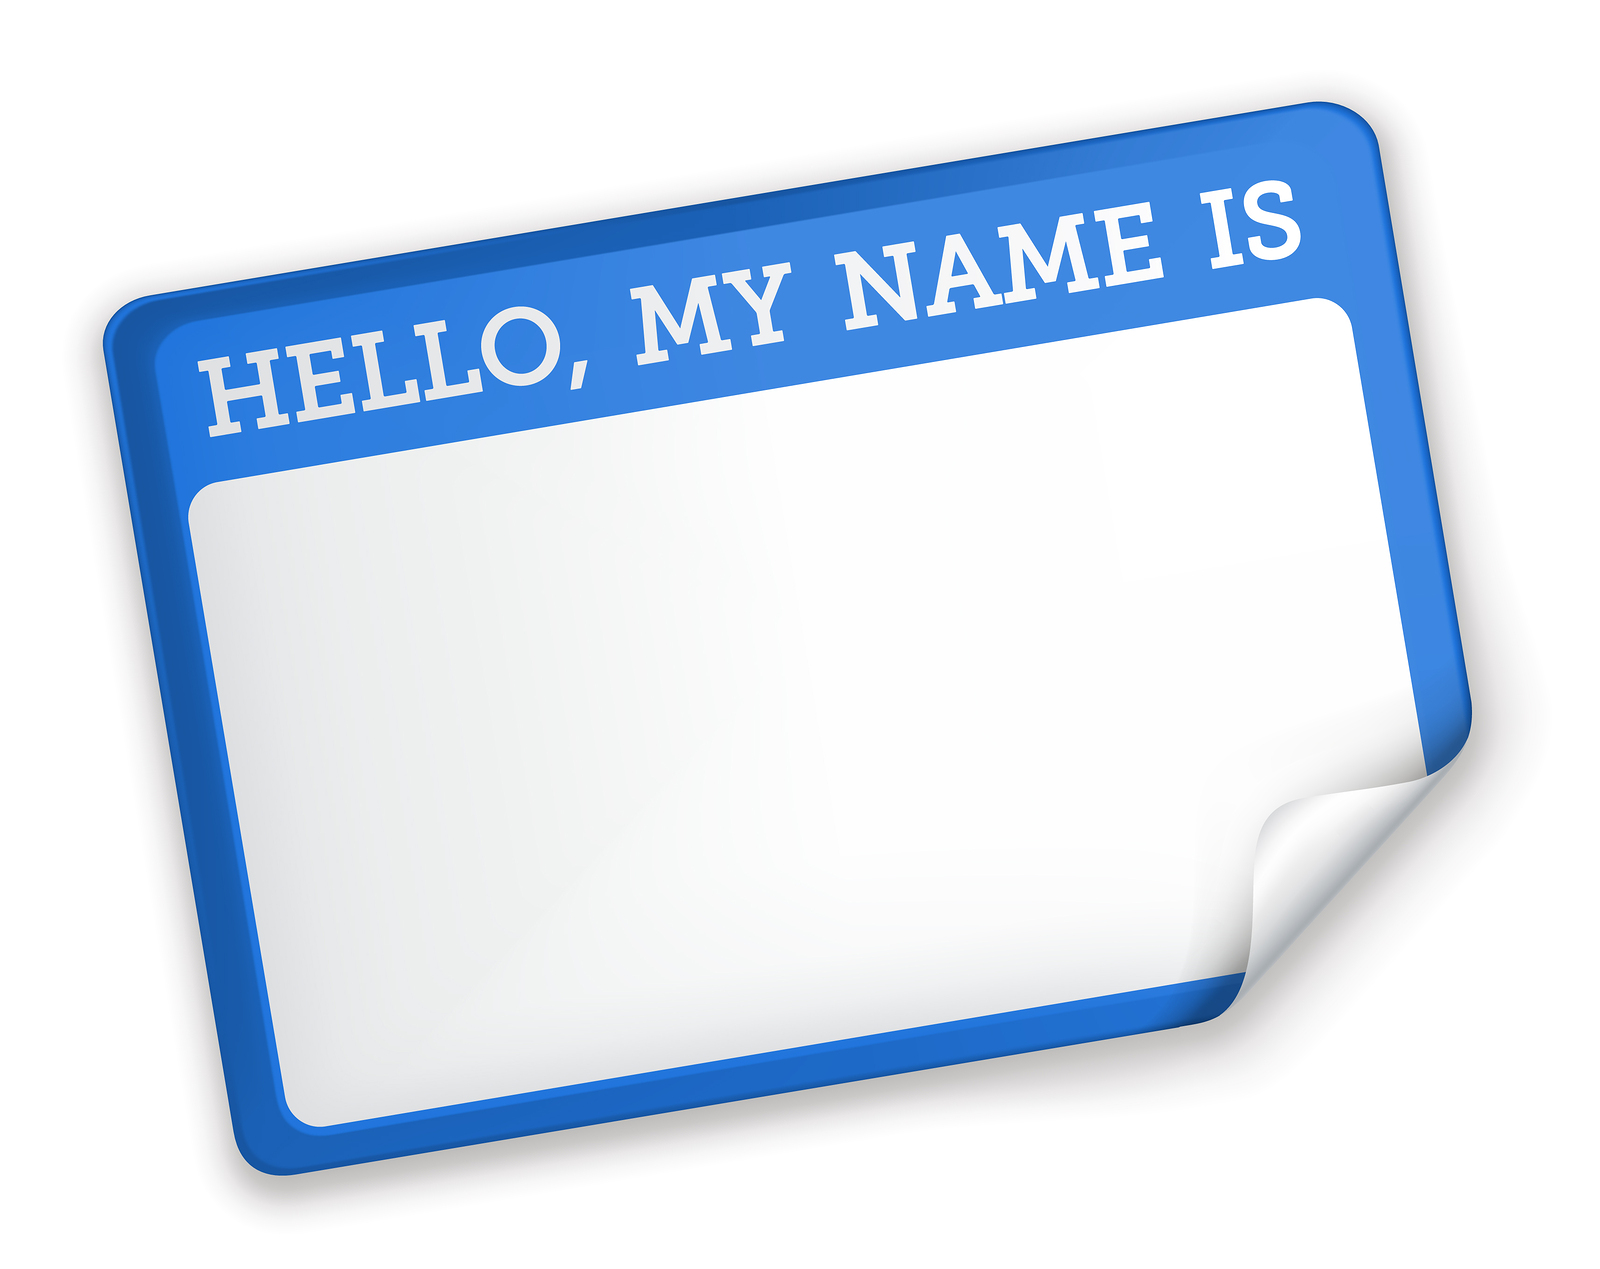 Name Tag Fridays a Great Way to Add A Bit of Fun to Your Workplace